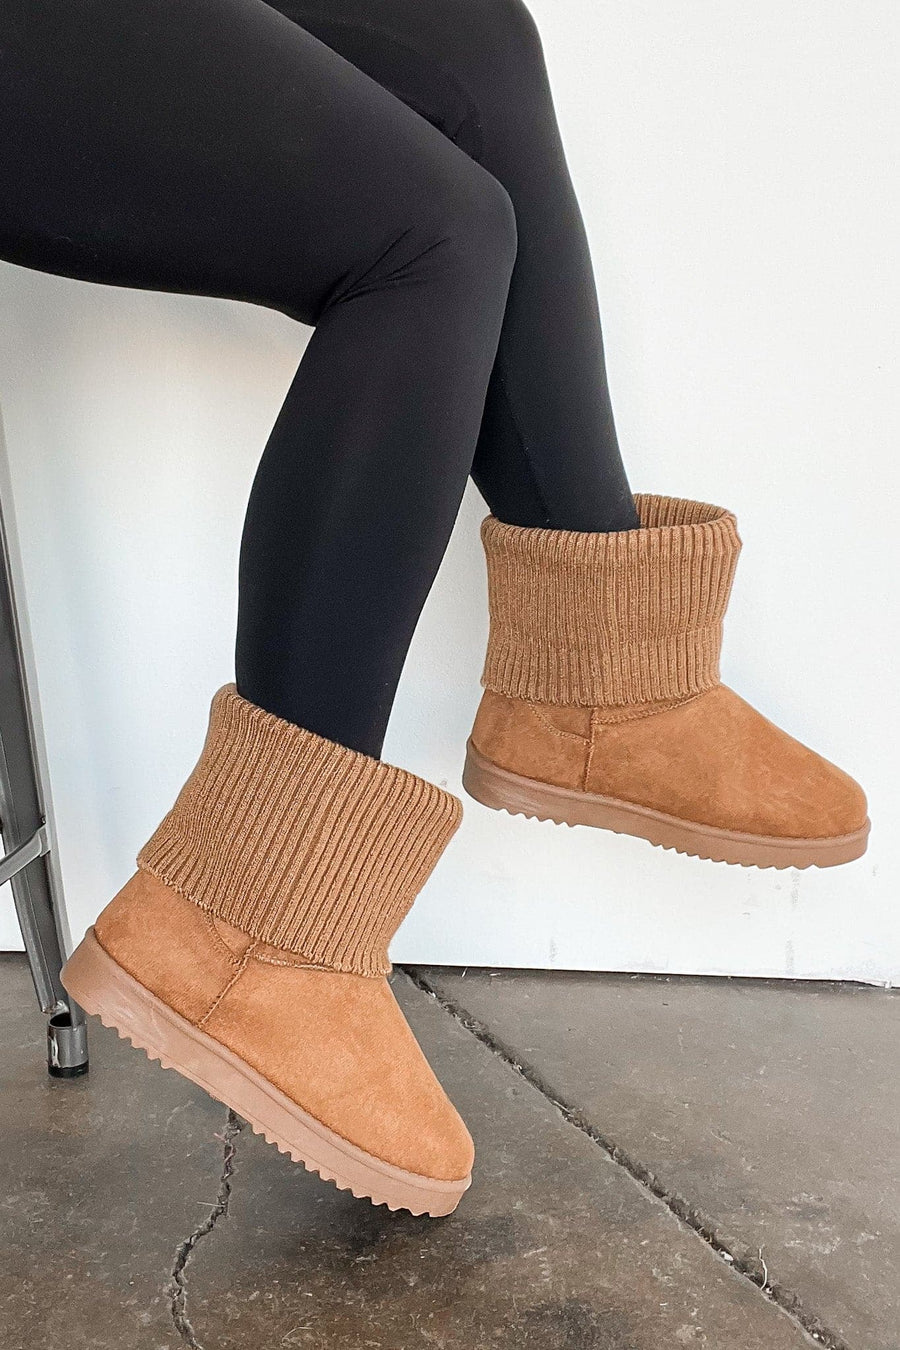 5.5 / Tan Covered in Cozy Fold Over Knit Suede Boots - kitchencabinetmagic